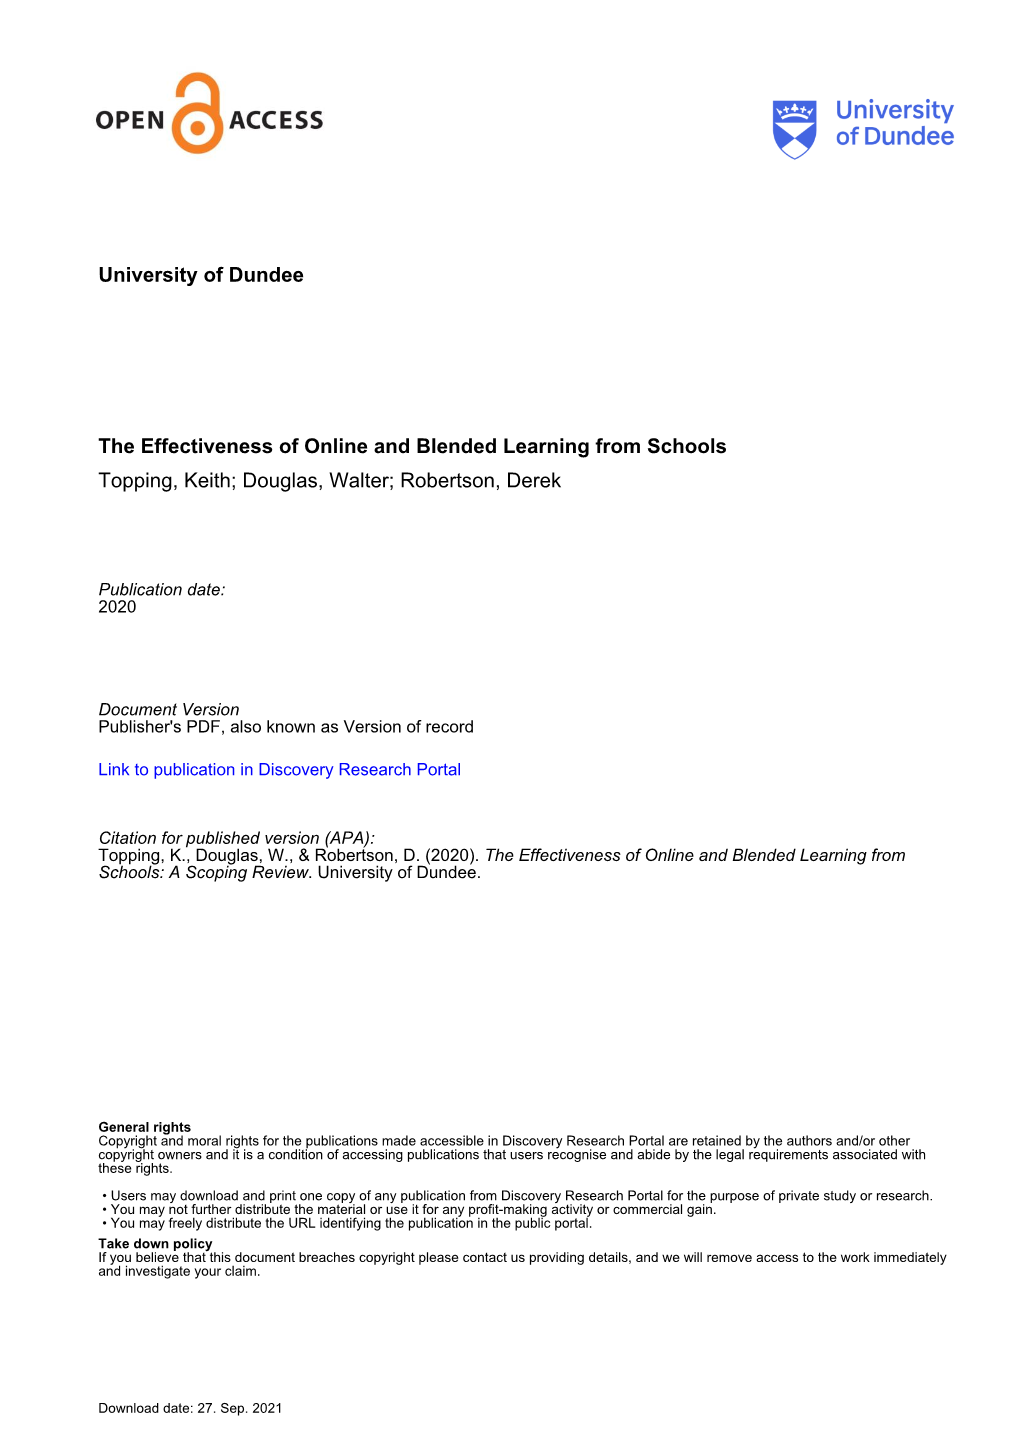 The Effectiveness of Online and Blended Learning from Schools Topping, Keith; Douglas, Walter; Robertson, Derek